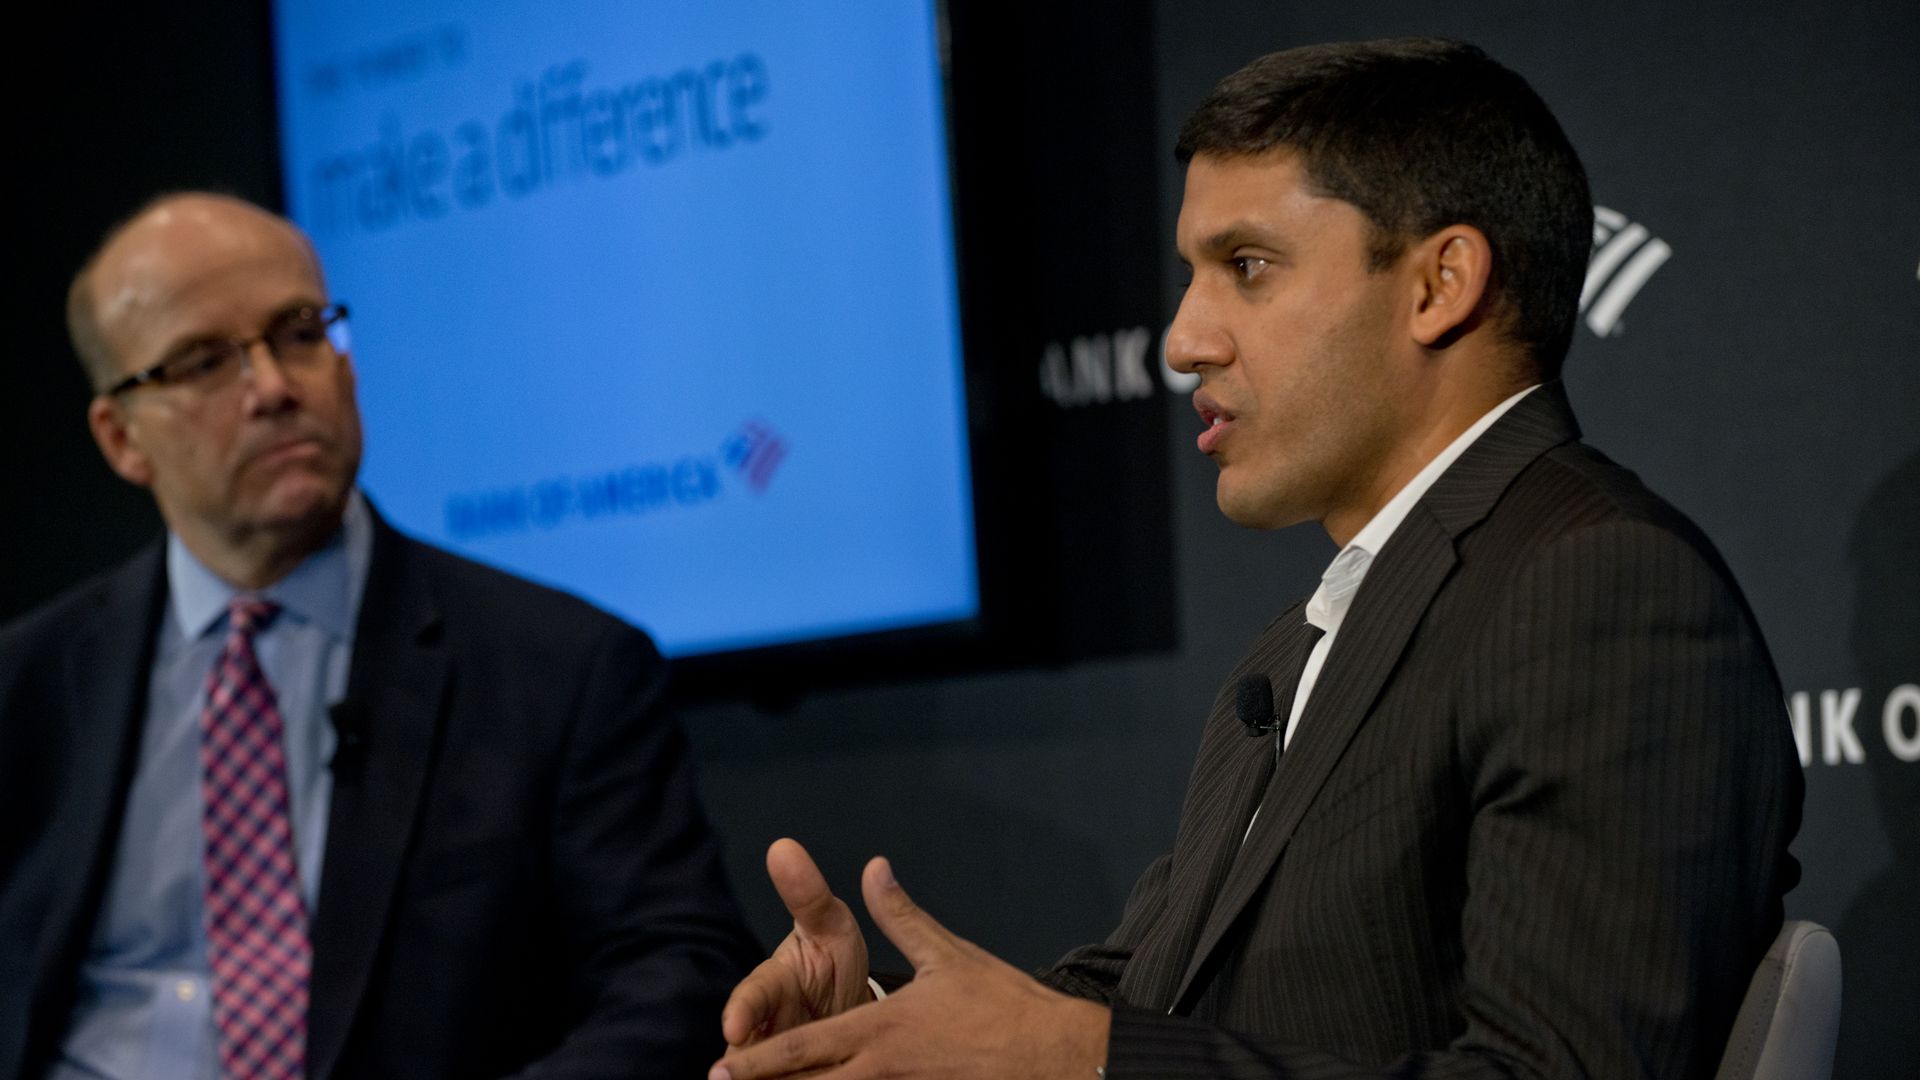 Dr. Rajiv Shah on the Axios stage